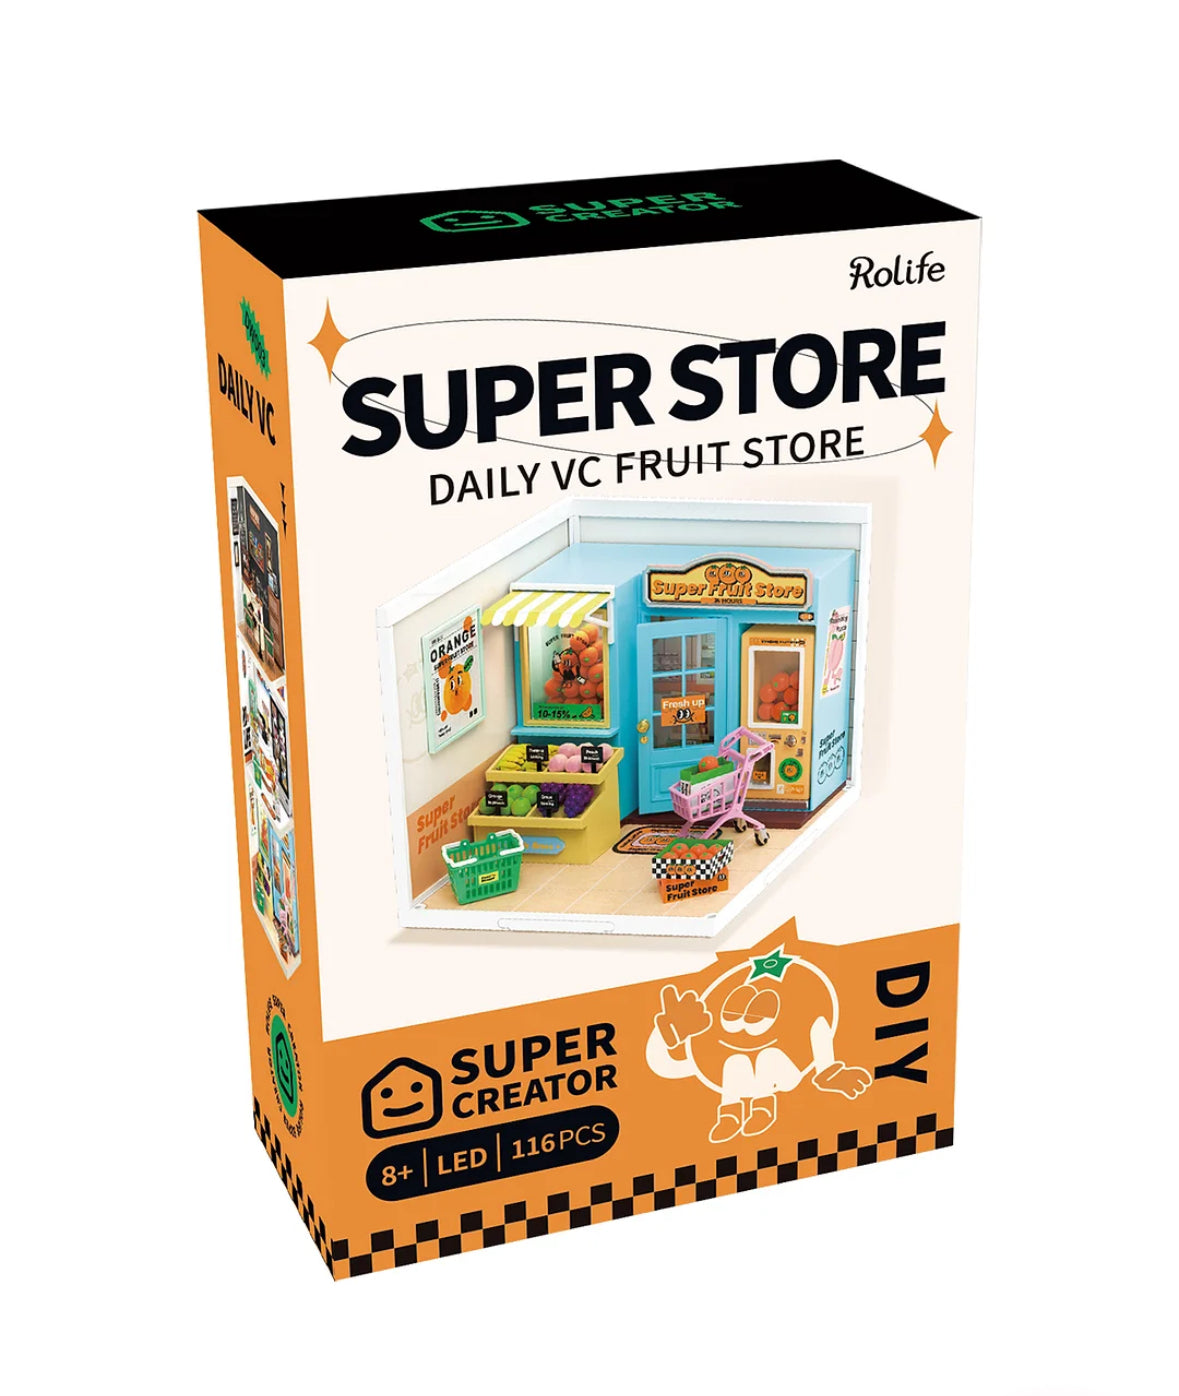 Daily VC Fruit Store